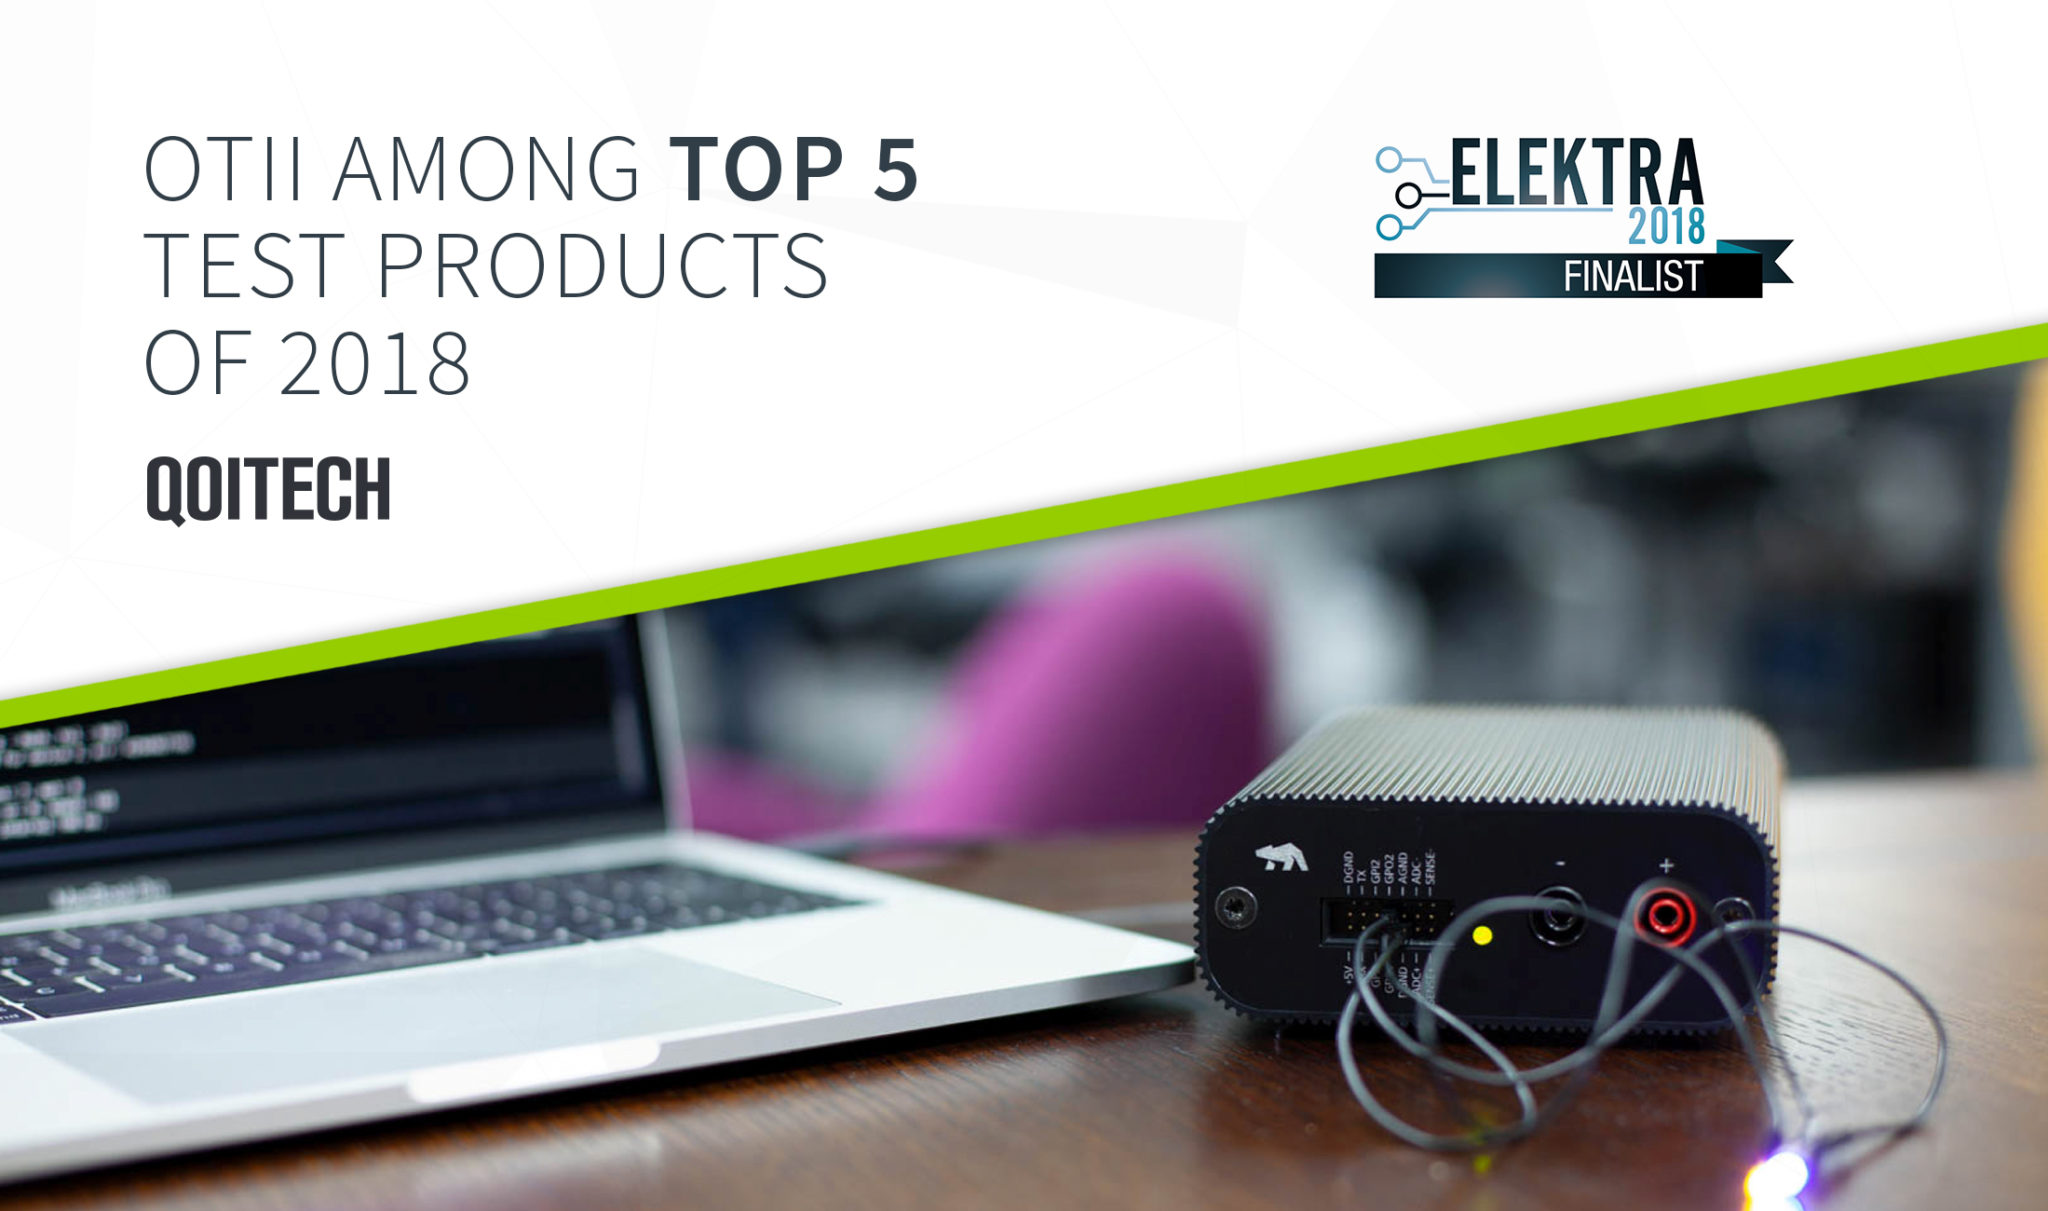 Otii among top 5 test products of the year - Qoitech